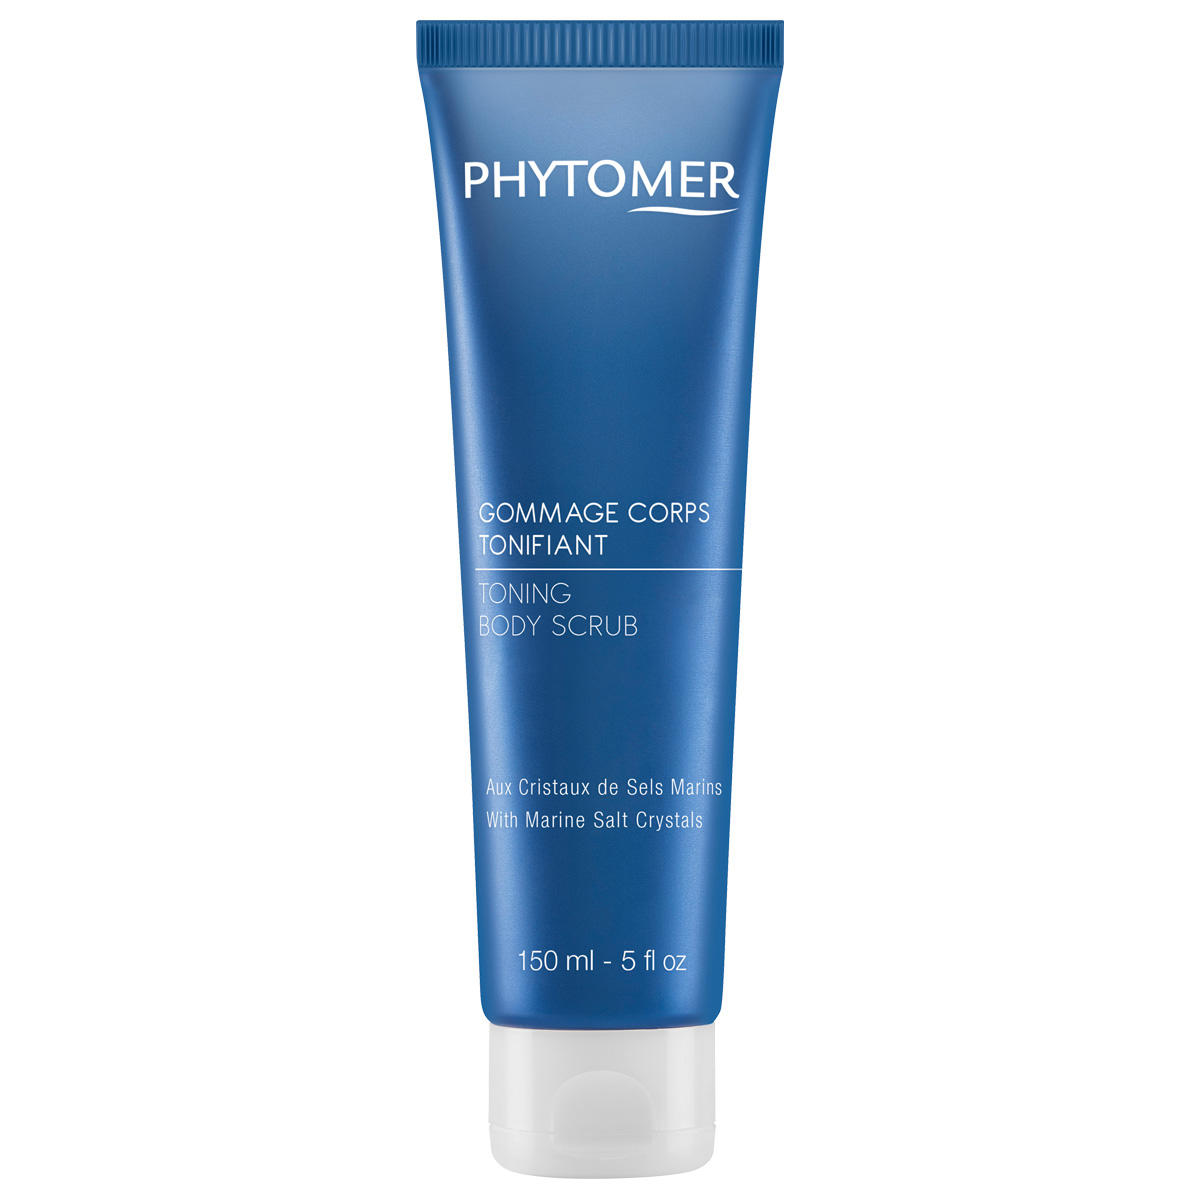 PHYTOMER GOMMAGE CORPS TONIFIANT 150 ml - 1